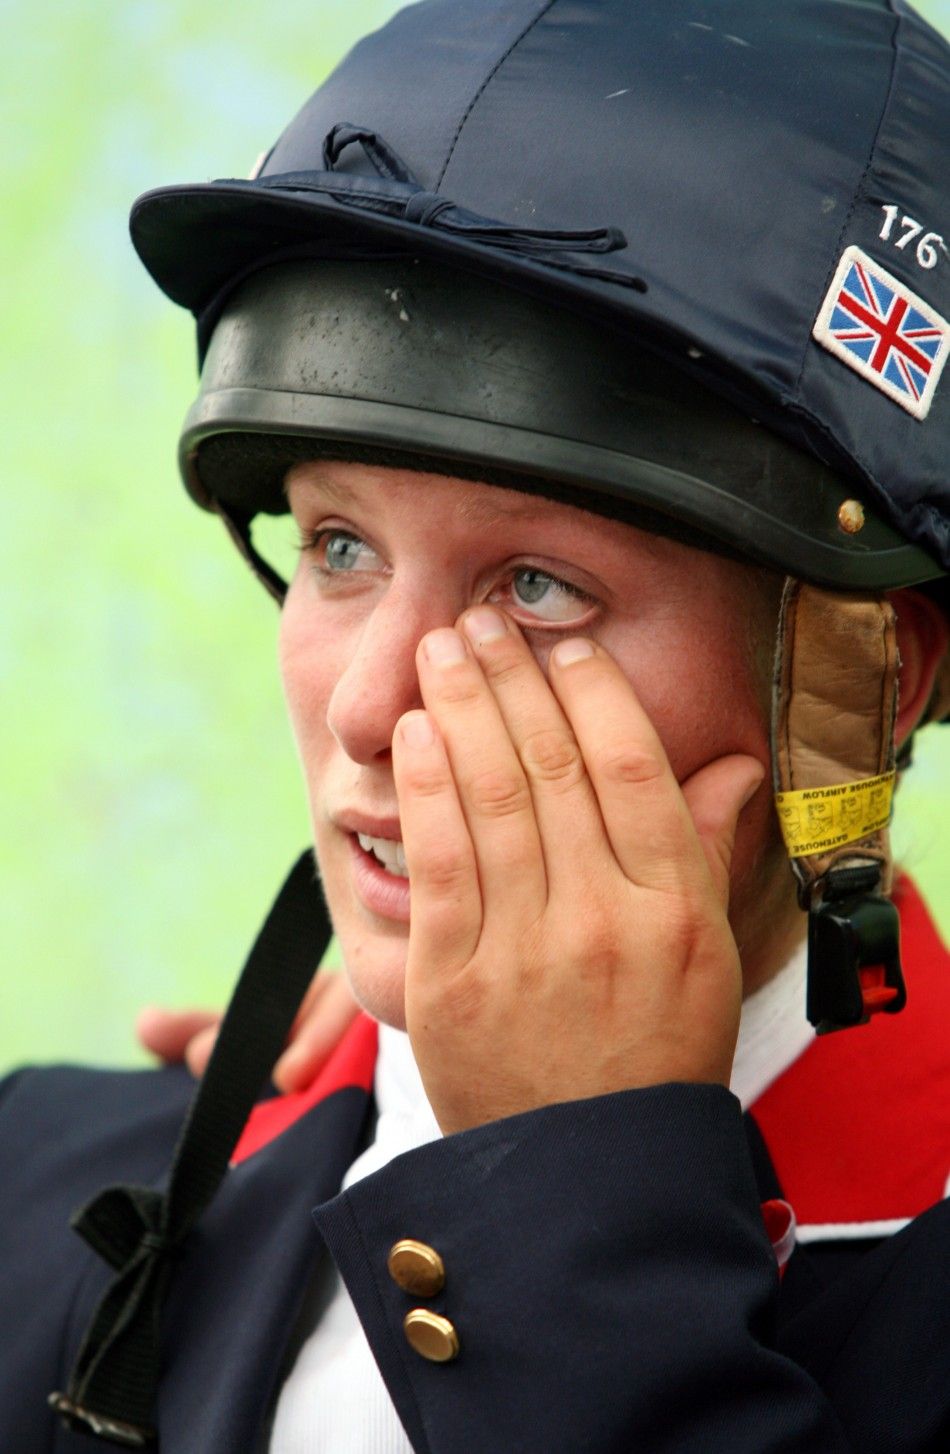 Britains Zara Phillips speaks with British team officials and team-mates after finishing her round in the show-jumping portion of the Eventing competition at the World Equestrian Games in Aachen